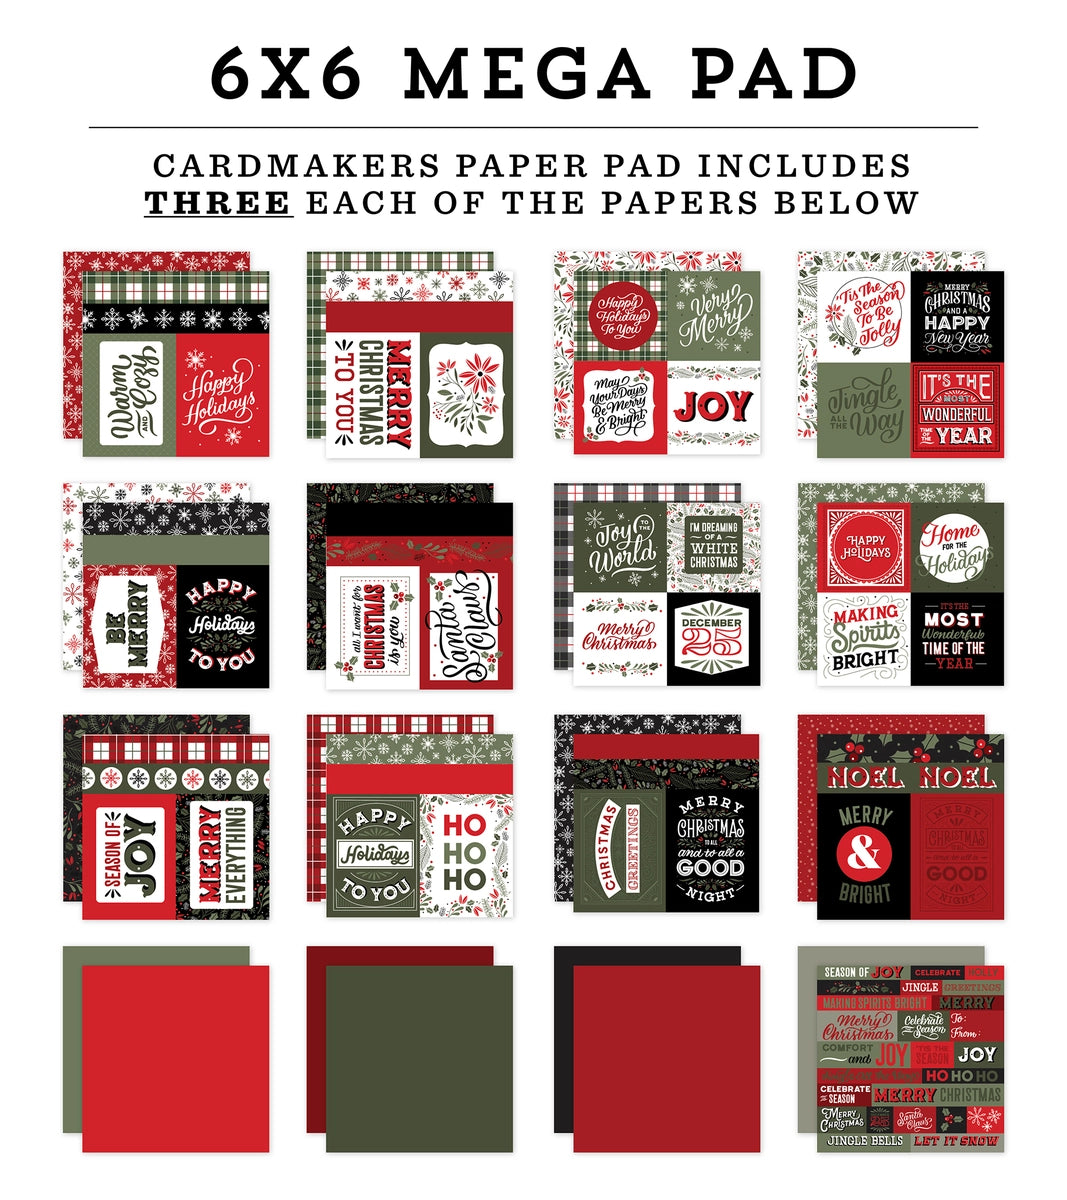 This 6" x 6" Mega paper pad is part of the Christmas Salutations Collection from Echo Park. This paper pad includes 48 sheets of double-sided paper, 3 each of 16 patterns. This includes some of the journaling cards and 3 pages of words and phrases that can be cut out and placed on your projects. 